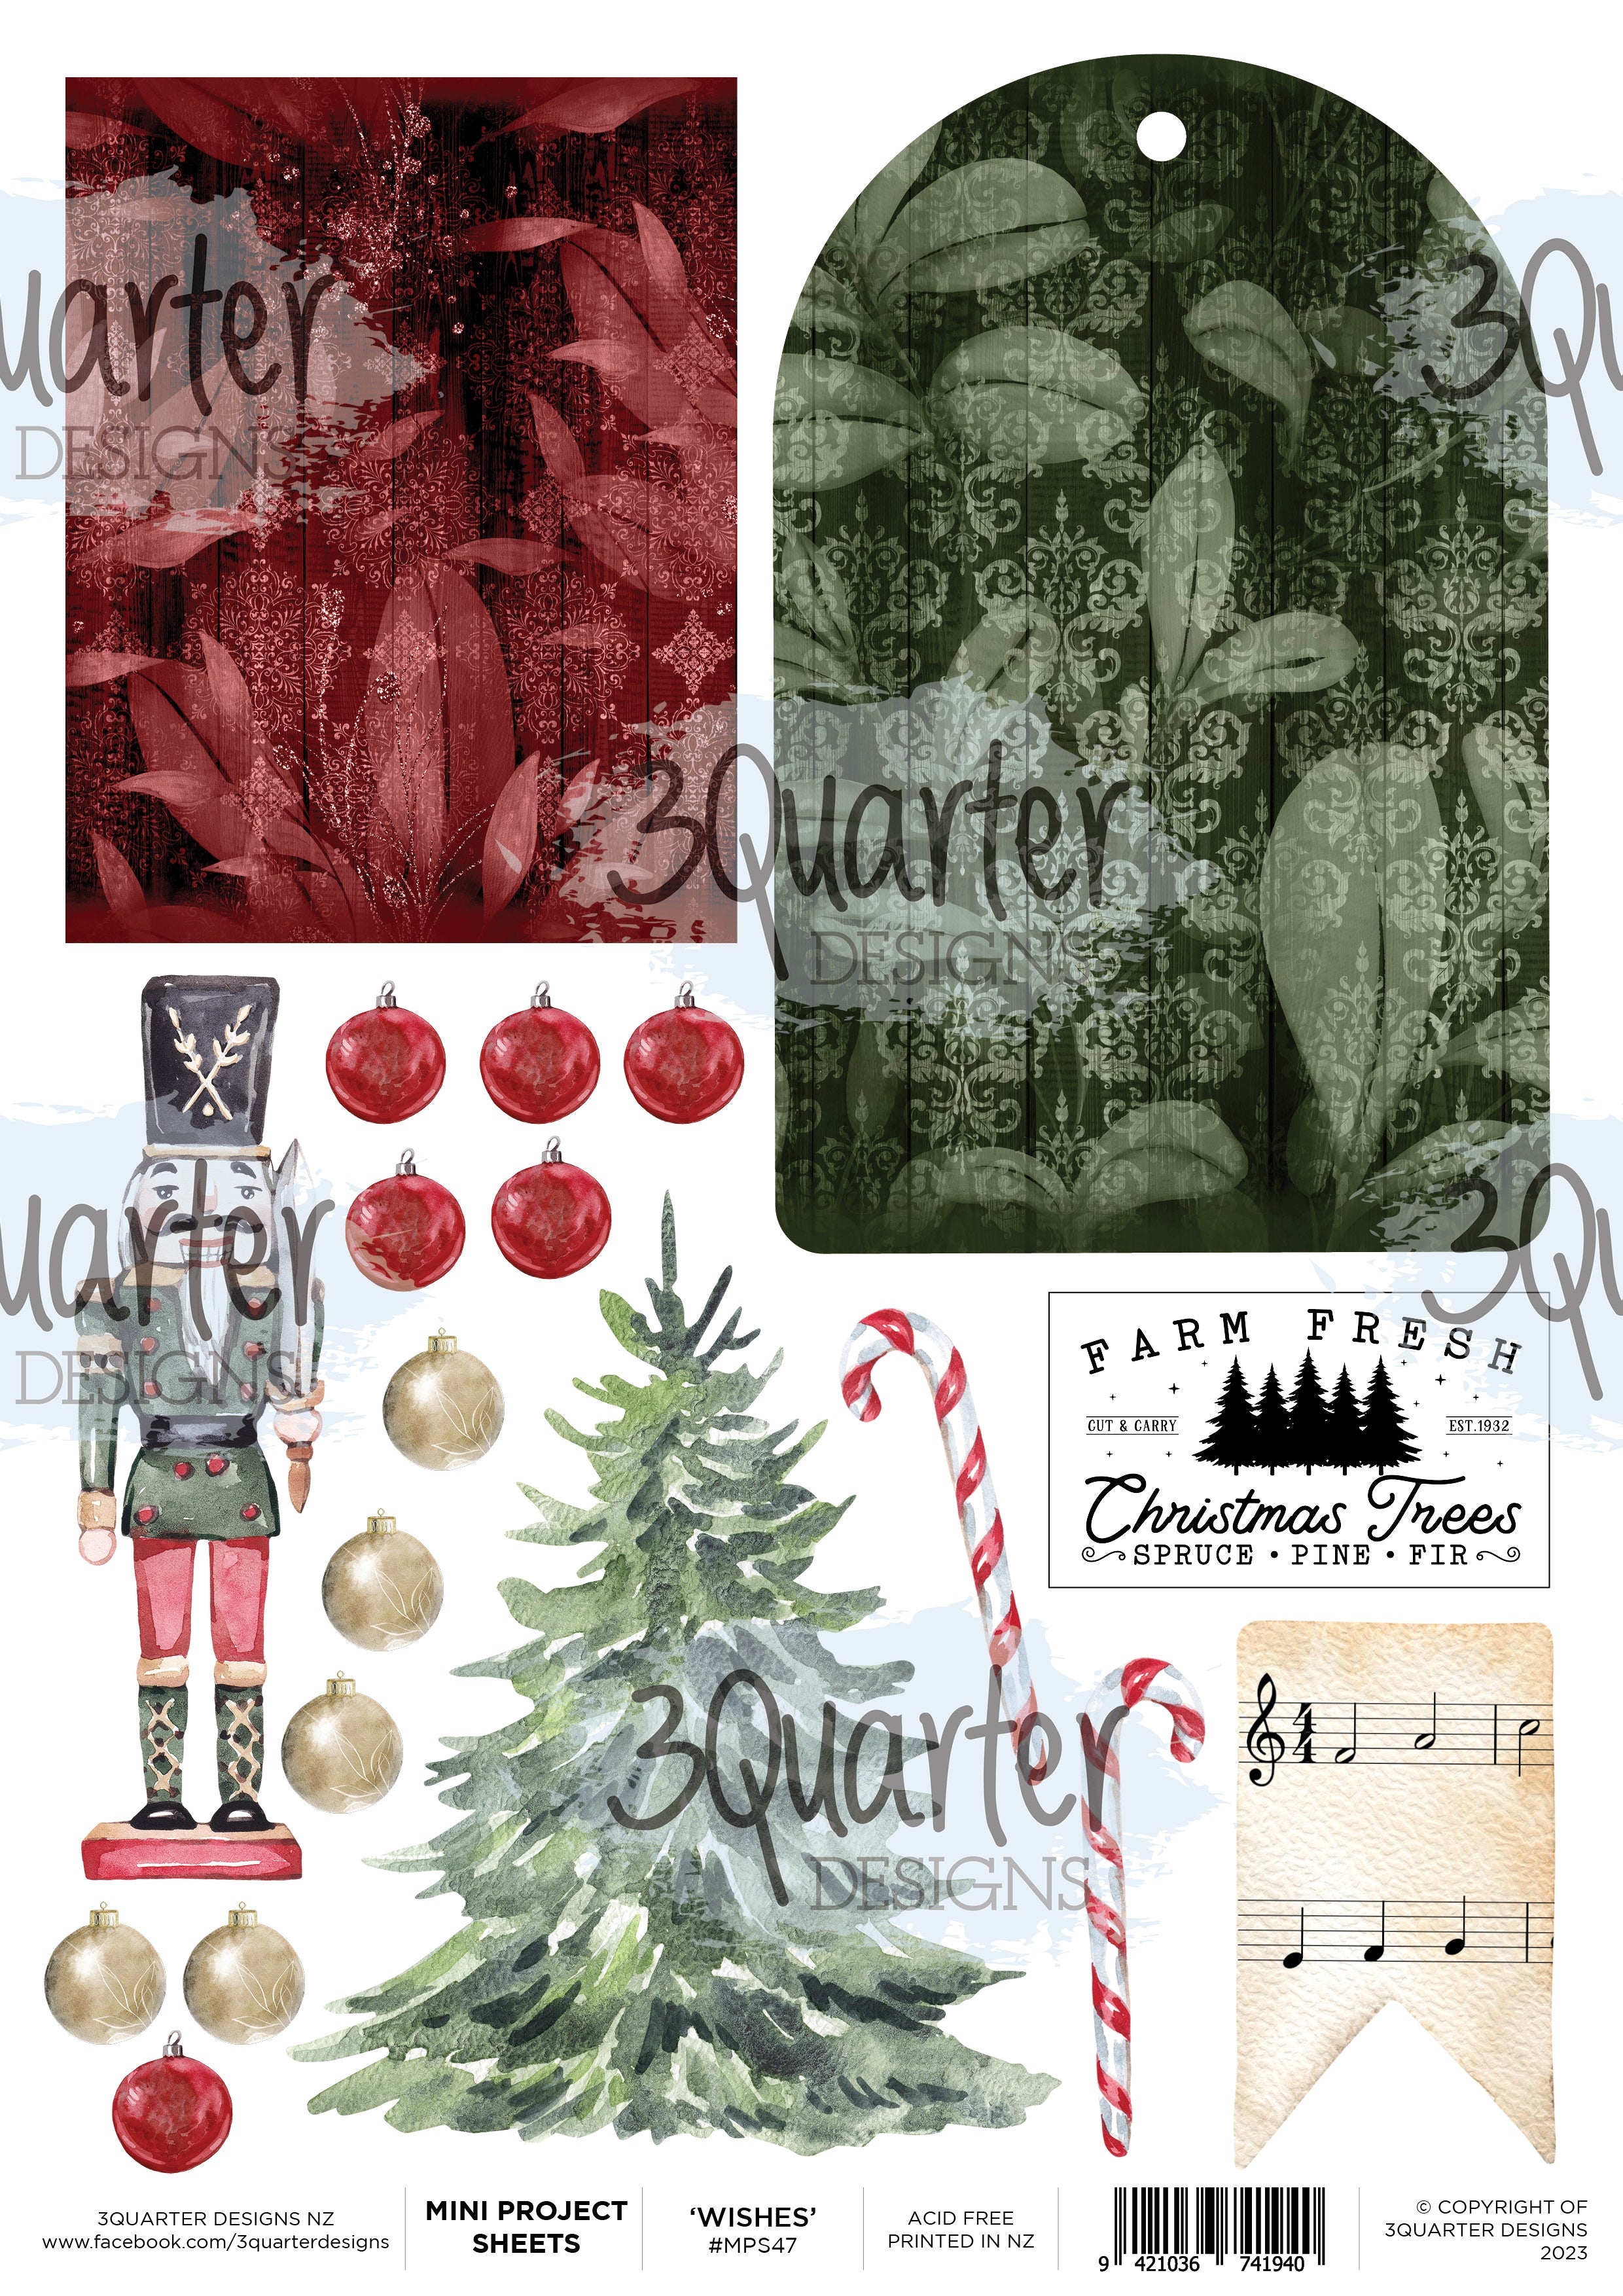 December Wishes - Mini Project Sheet